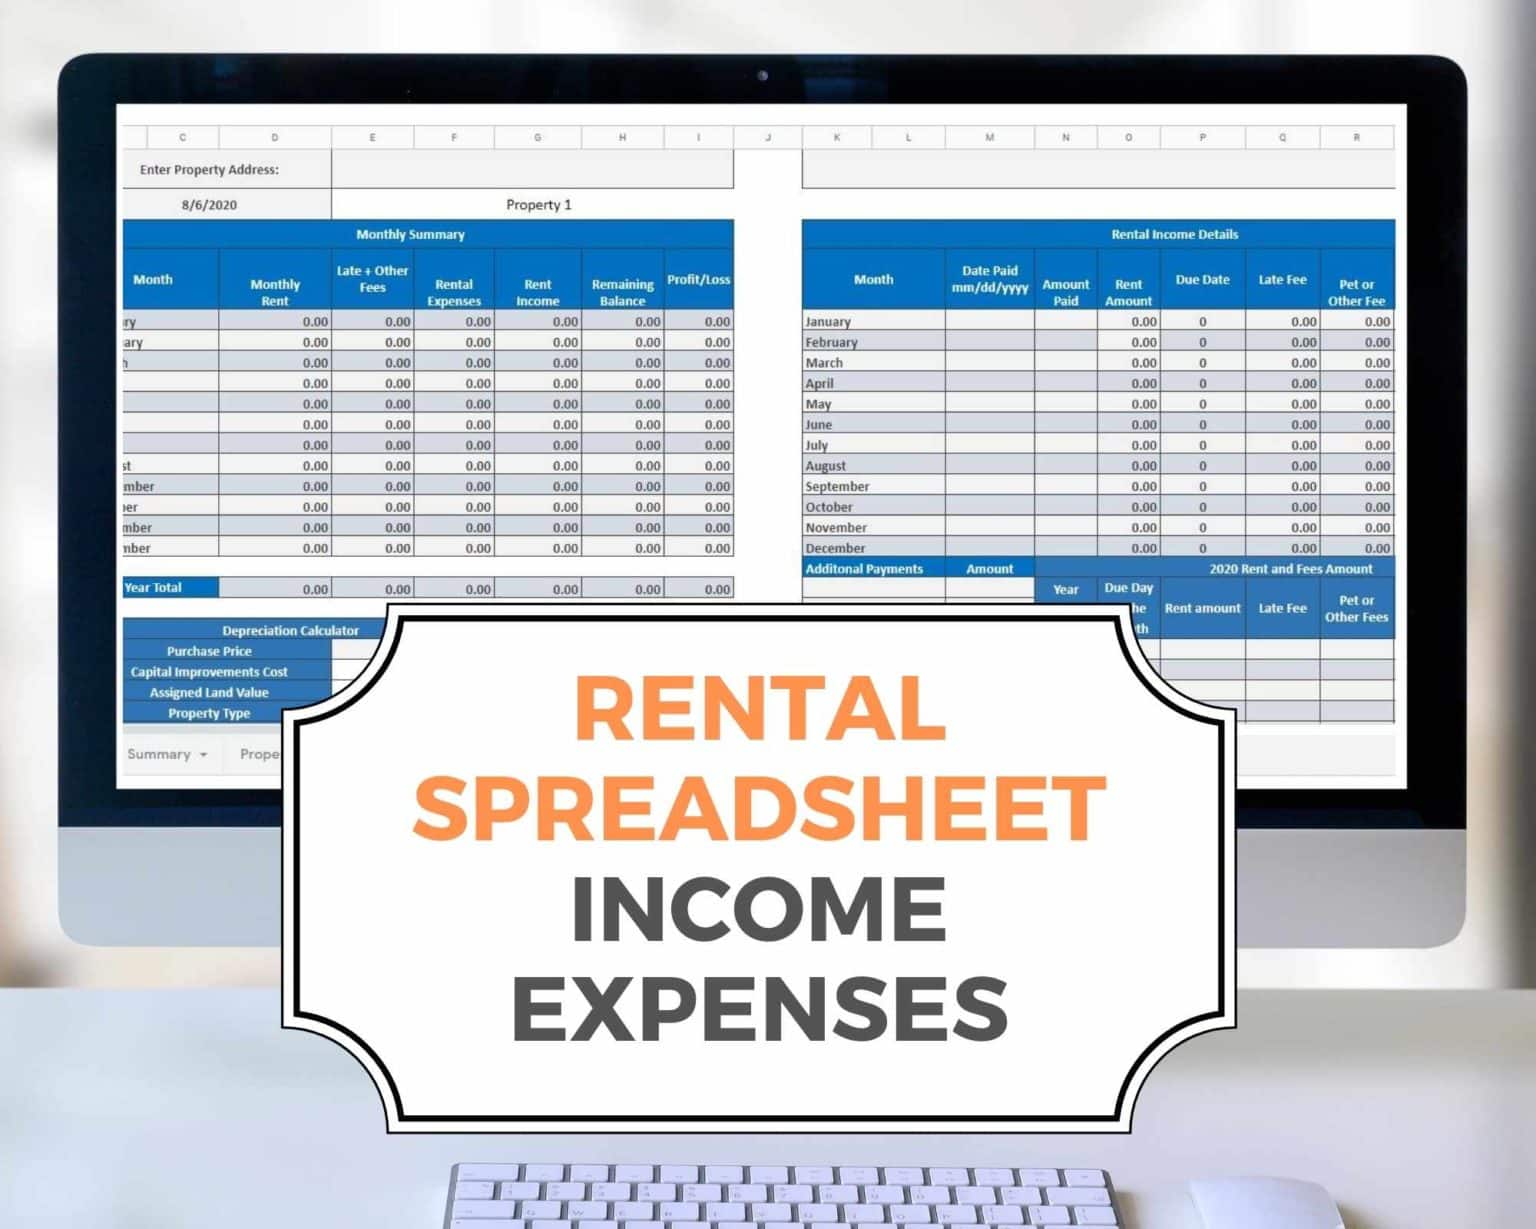 income and expense template excel free